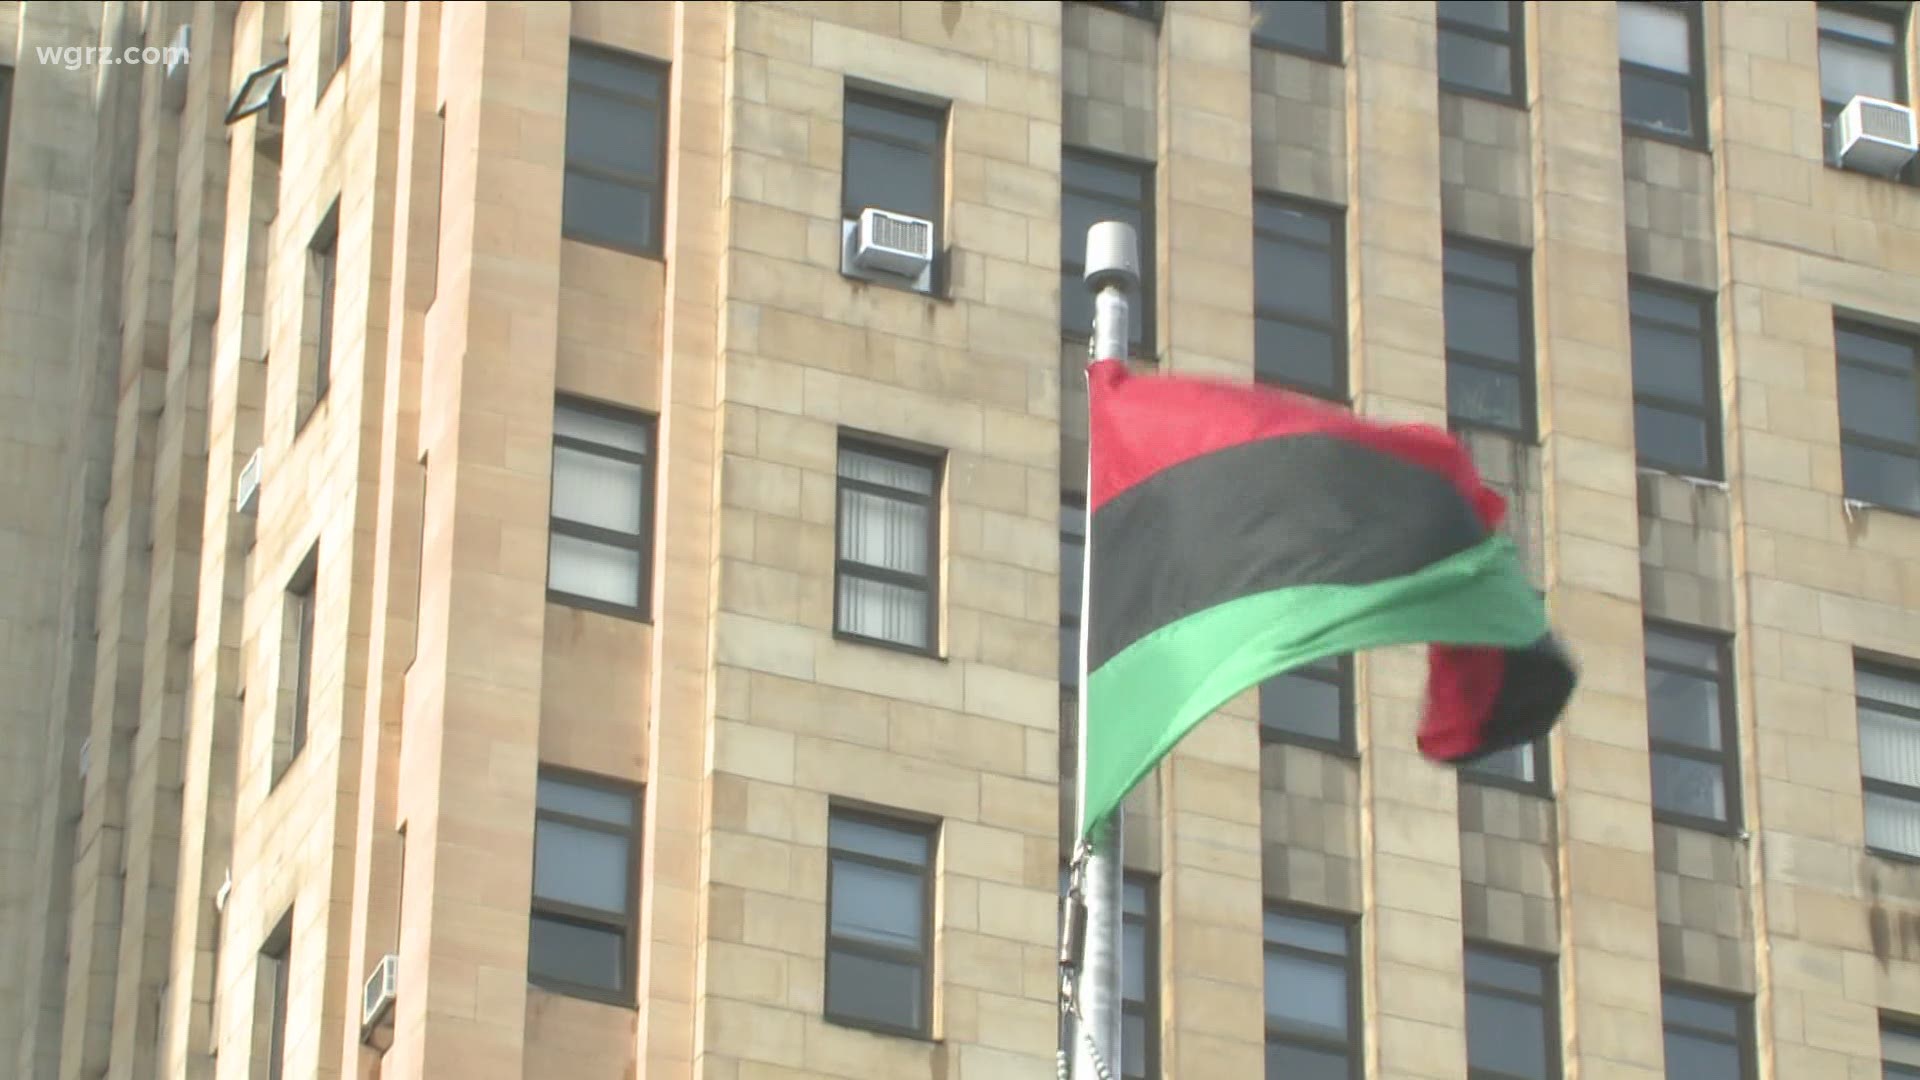 Inclement weather delayed the annual flag raising tradition, but today the flag was raised in front of Buffalo city hall celebrating Kwanzaa.